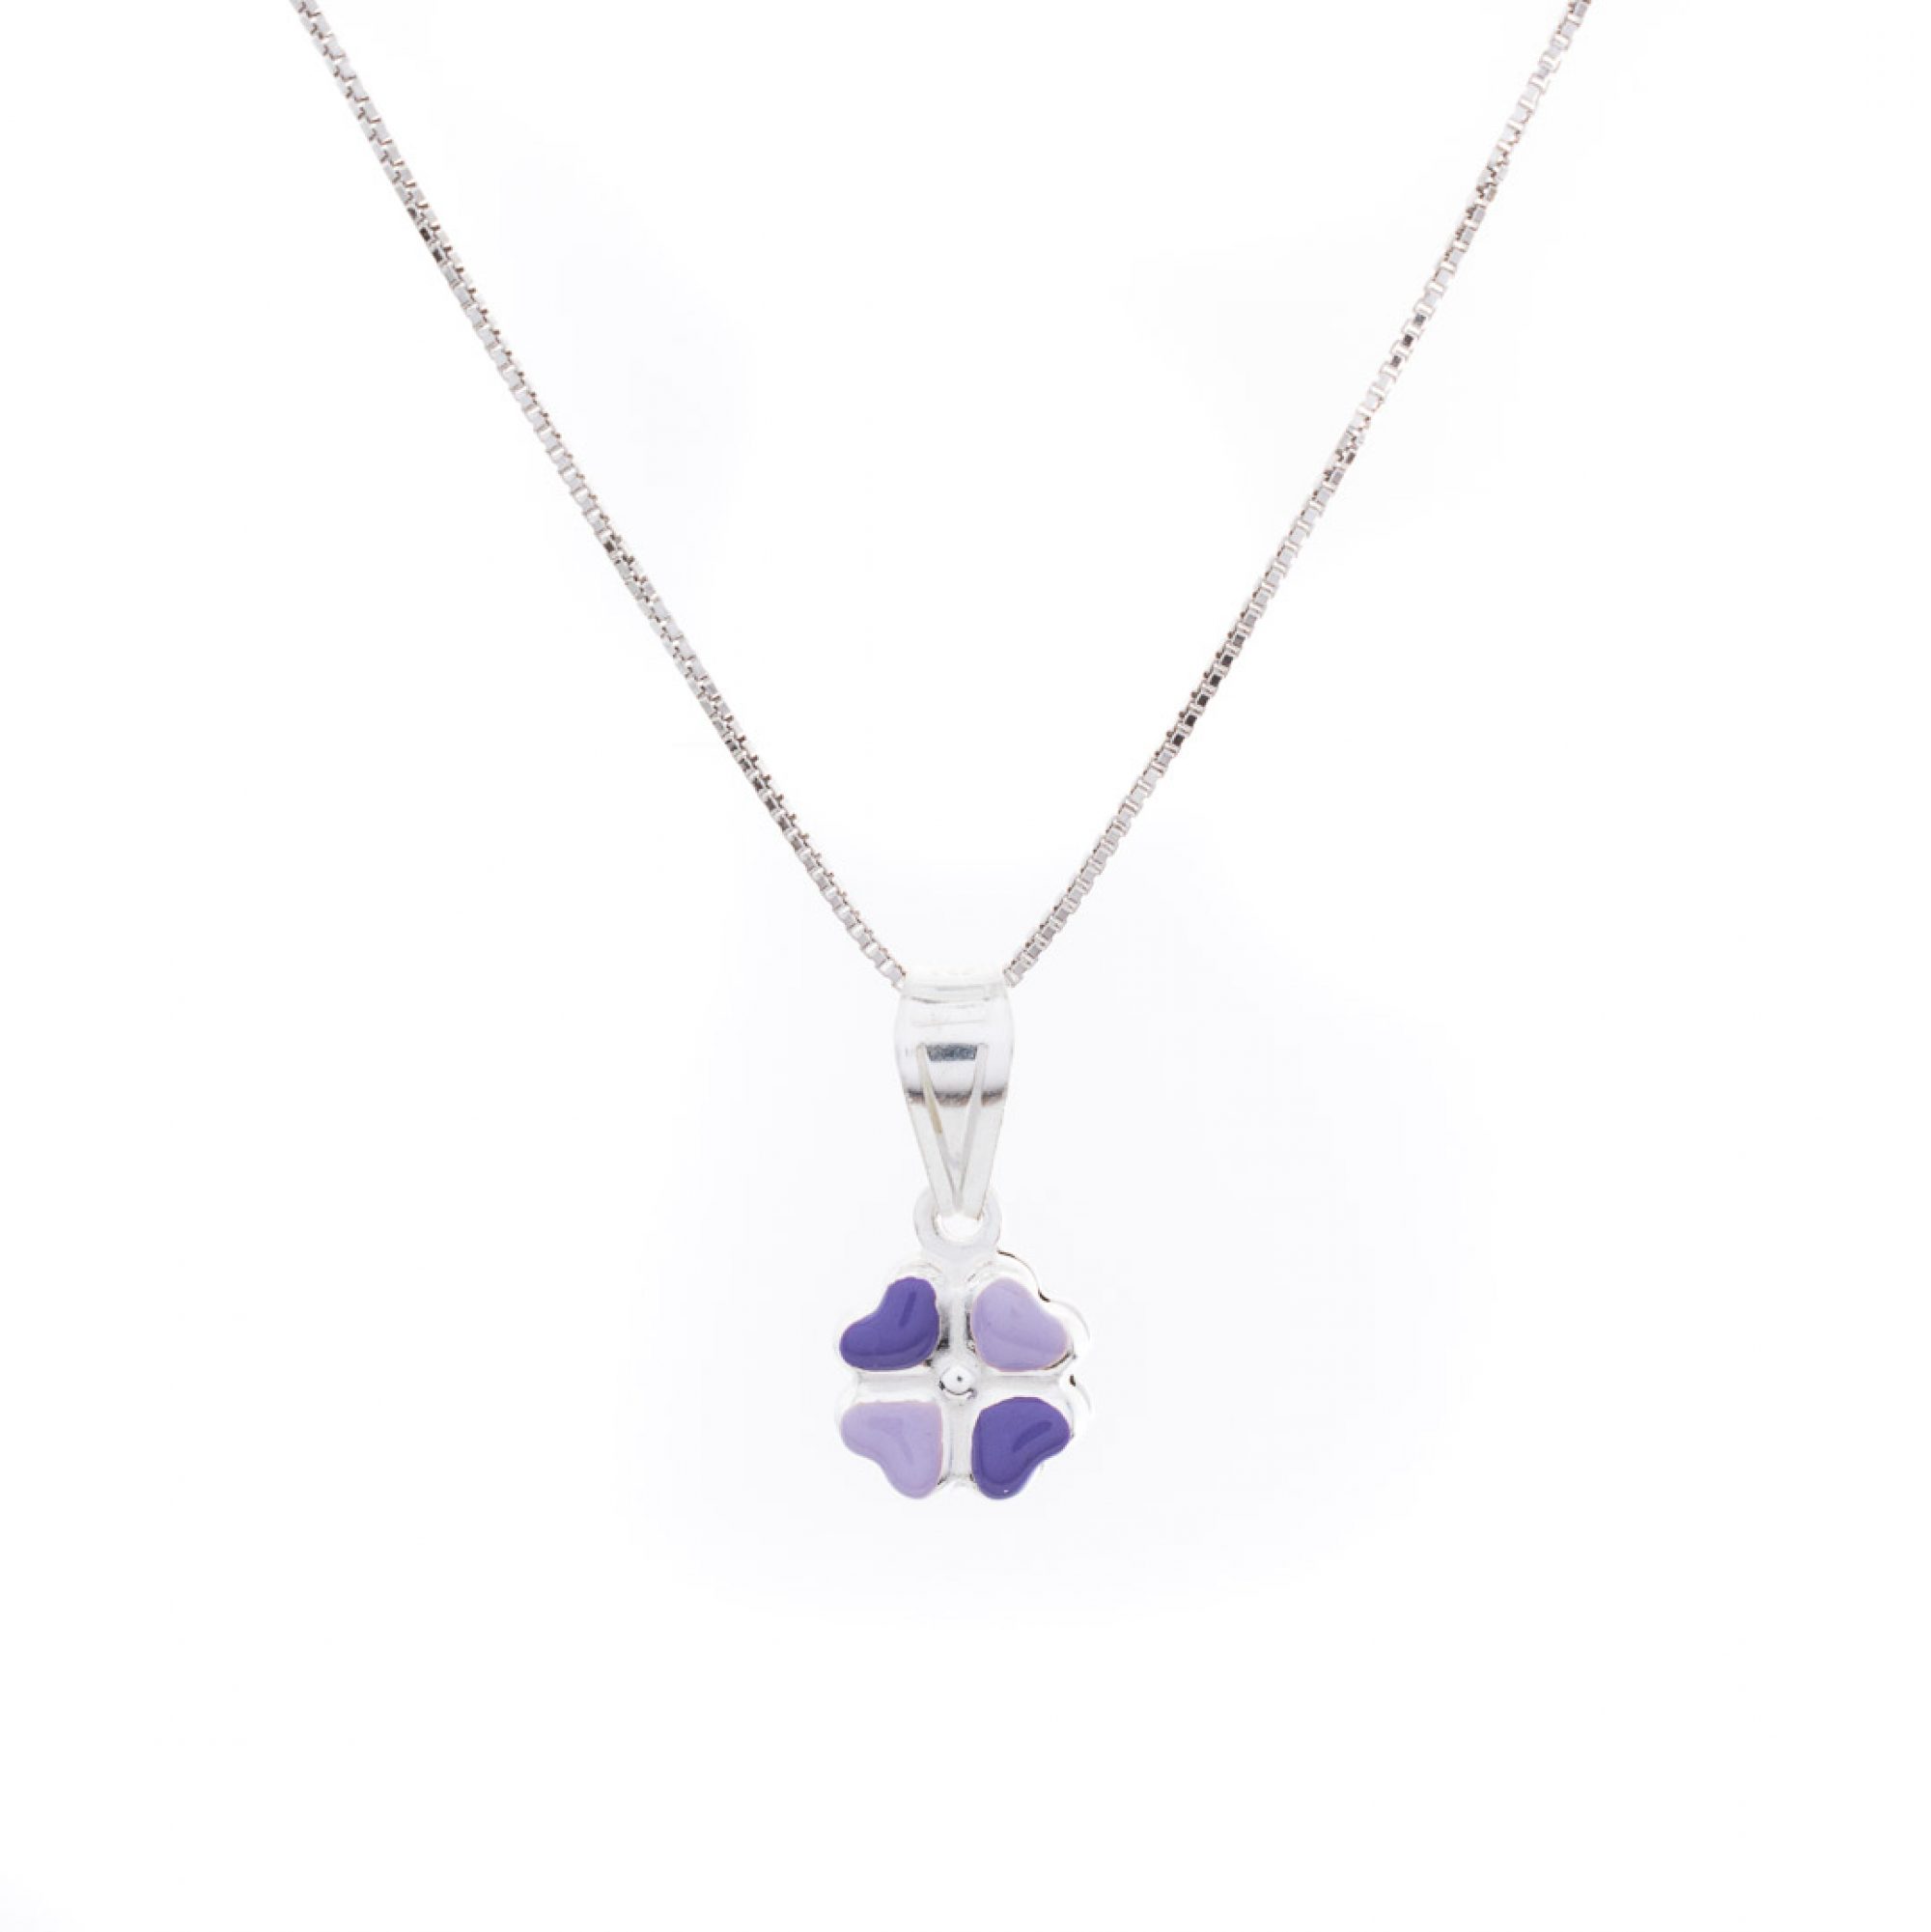 Flower necklace with enamel